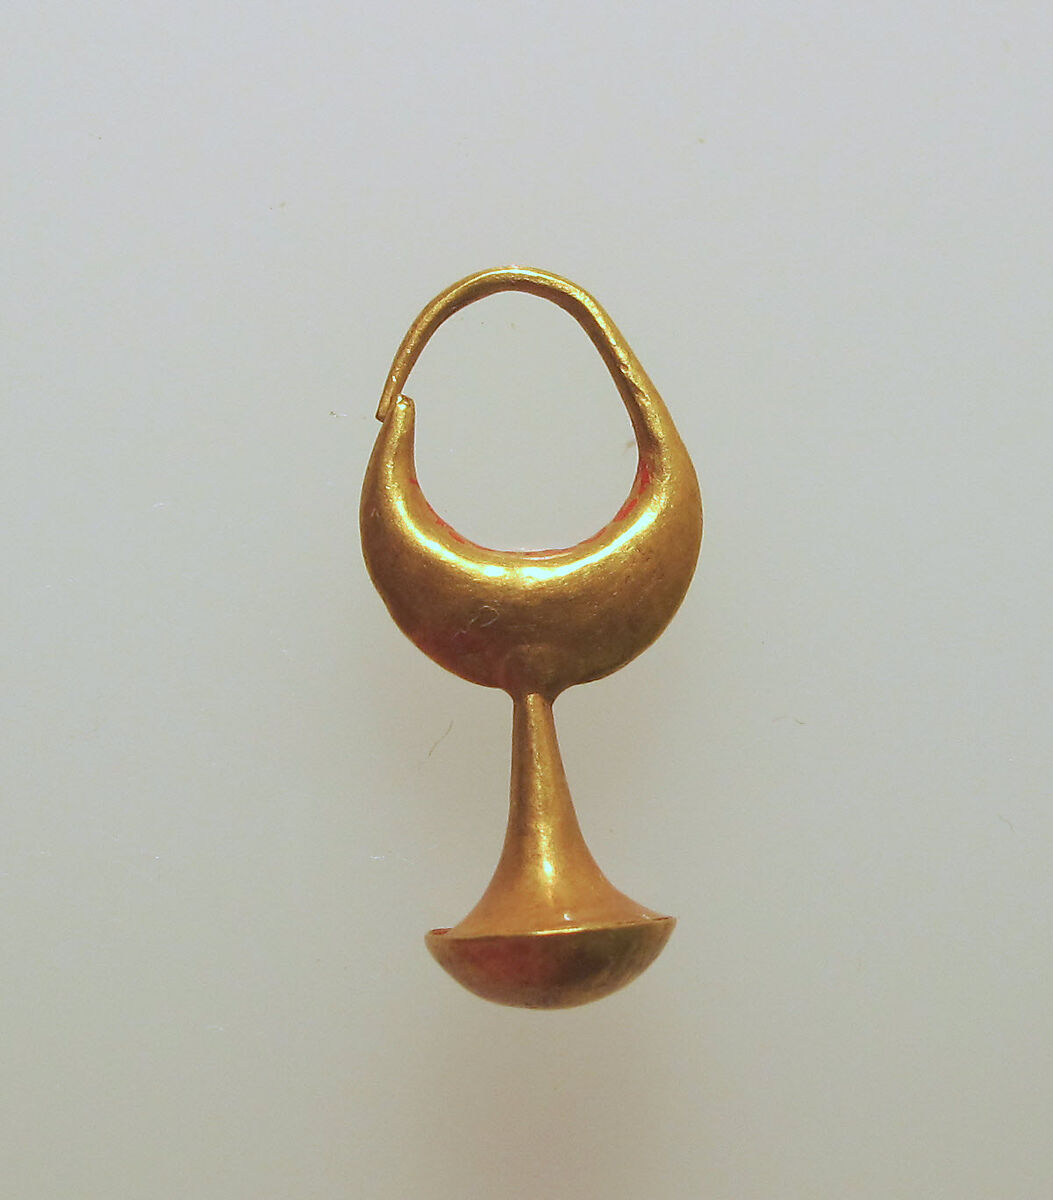 Earring with nail head pendant, 12, Gold, Cypriot 